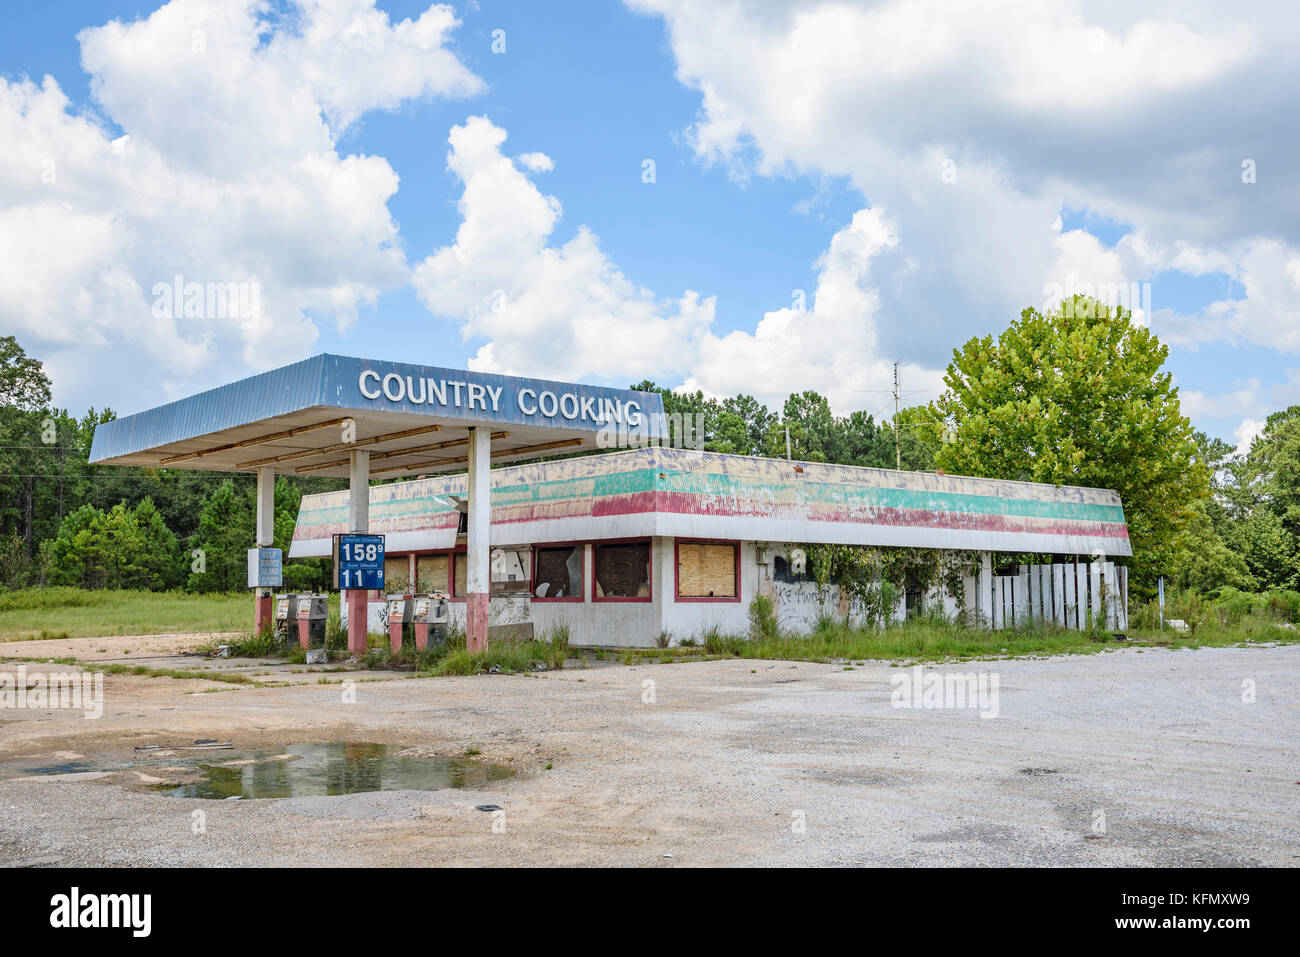 Abandoned gas station and cafe restaurant on a rural country road in Alabama, USA. Stock Photo